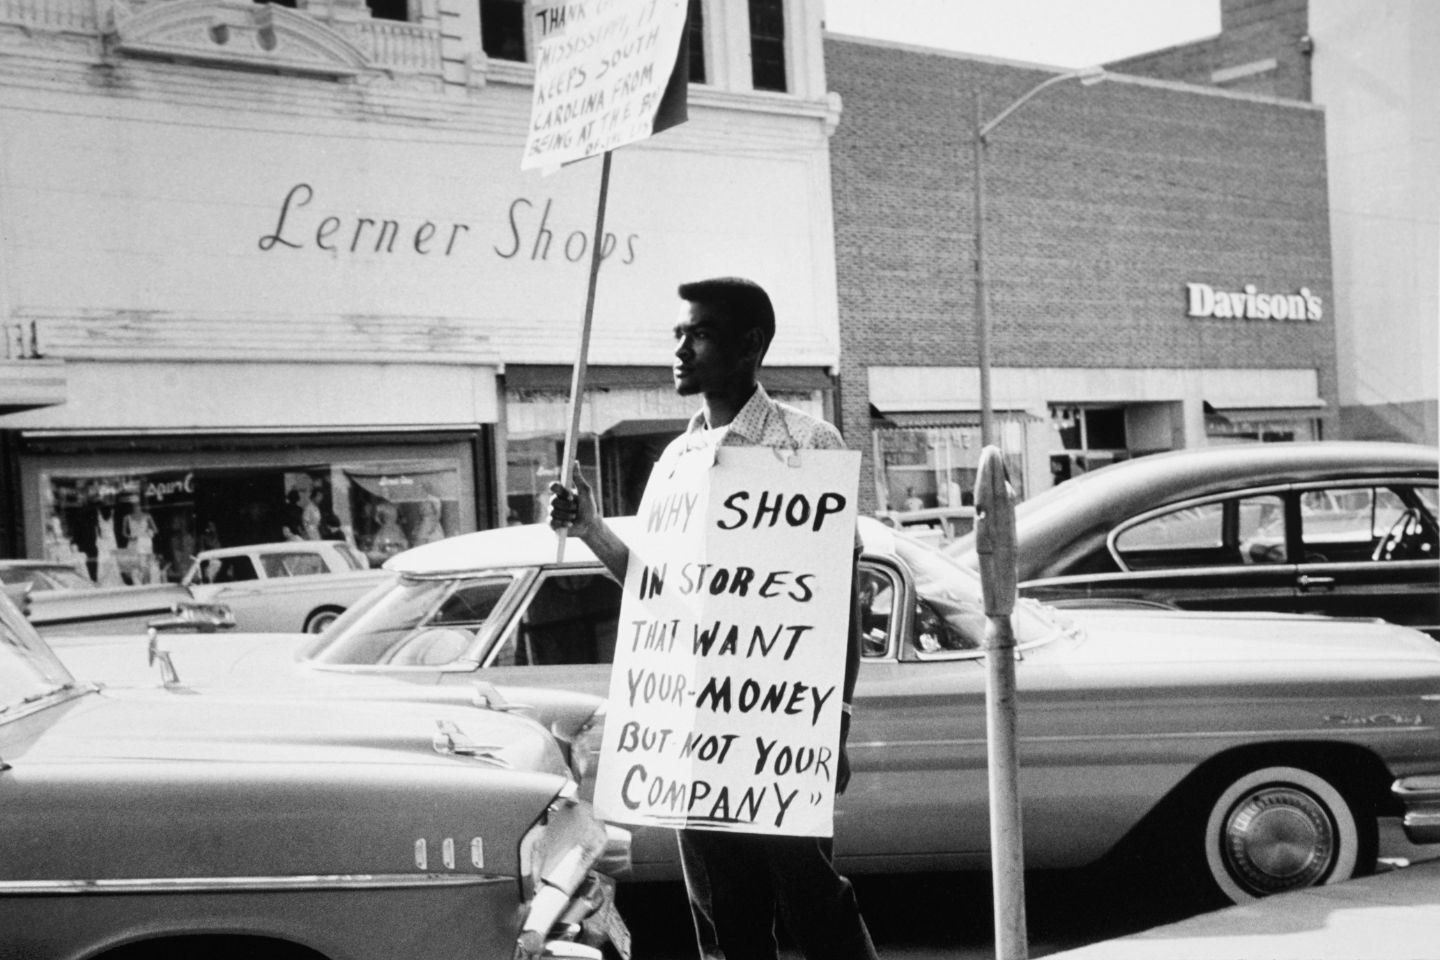 This Museum Exhibit Brings Pride To Growing Up Black in the South